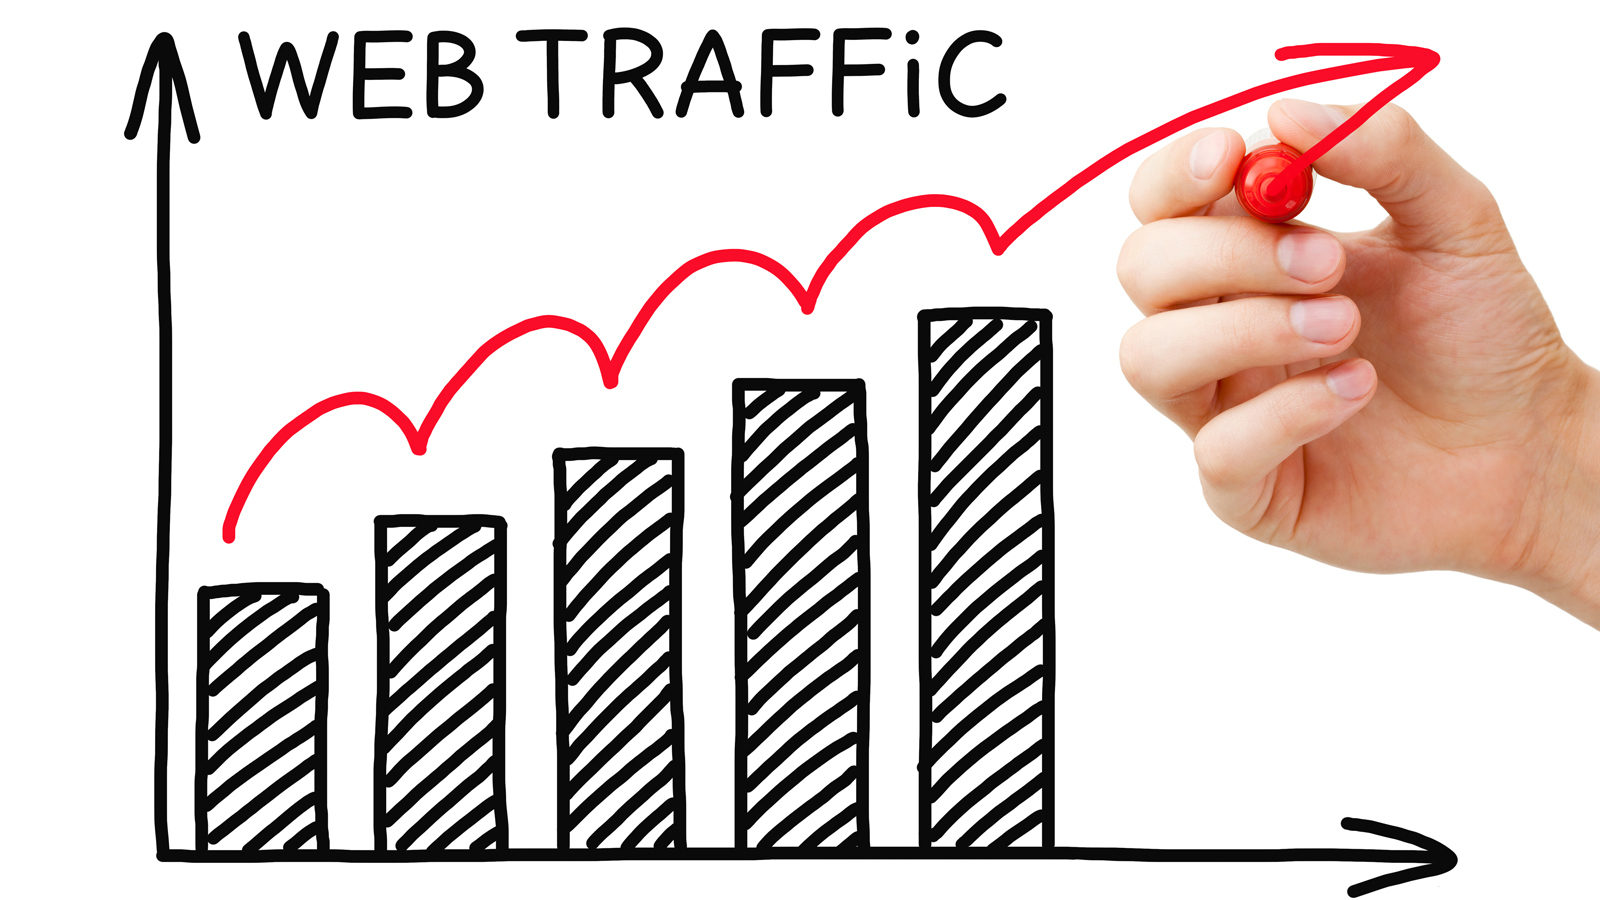 Increased conversions and traffic